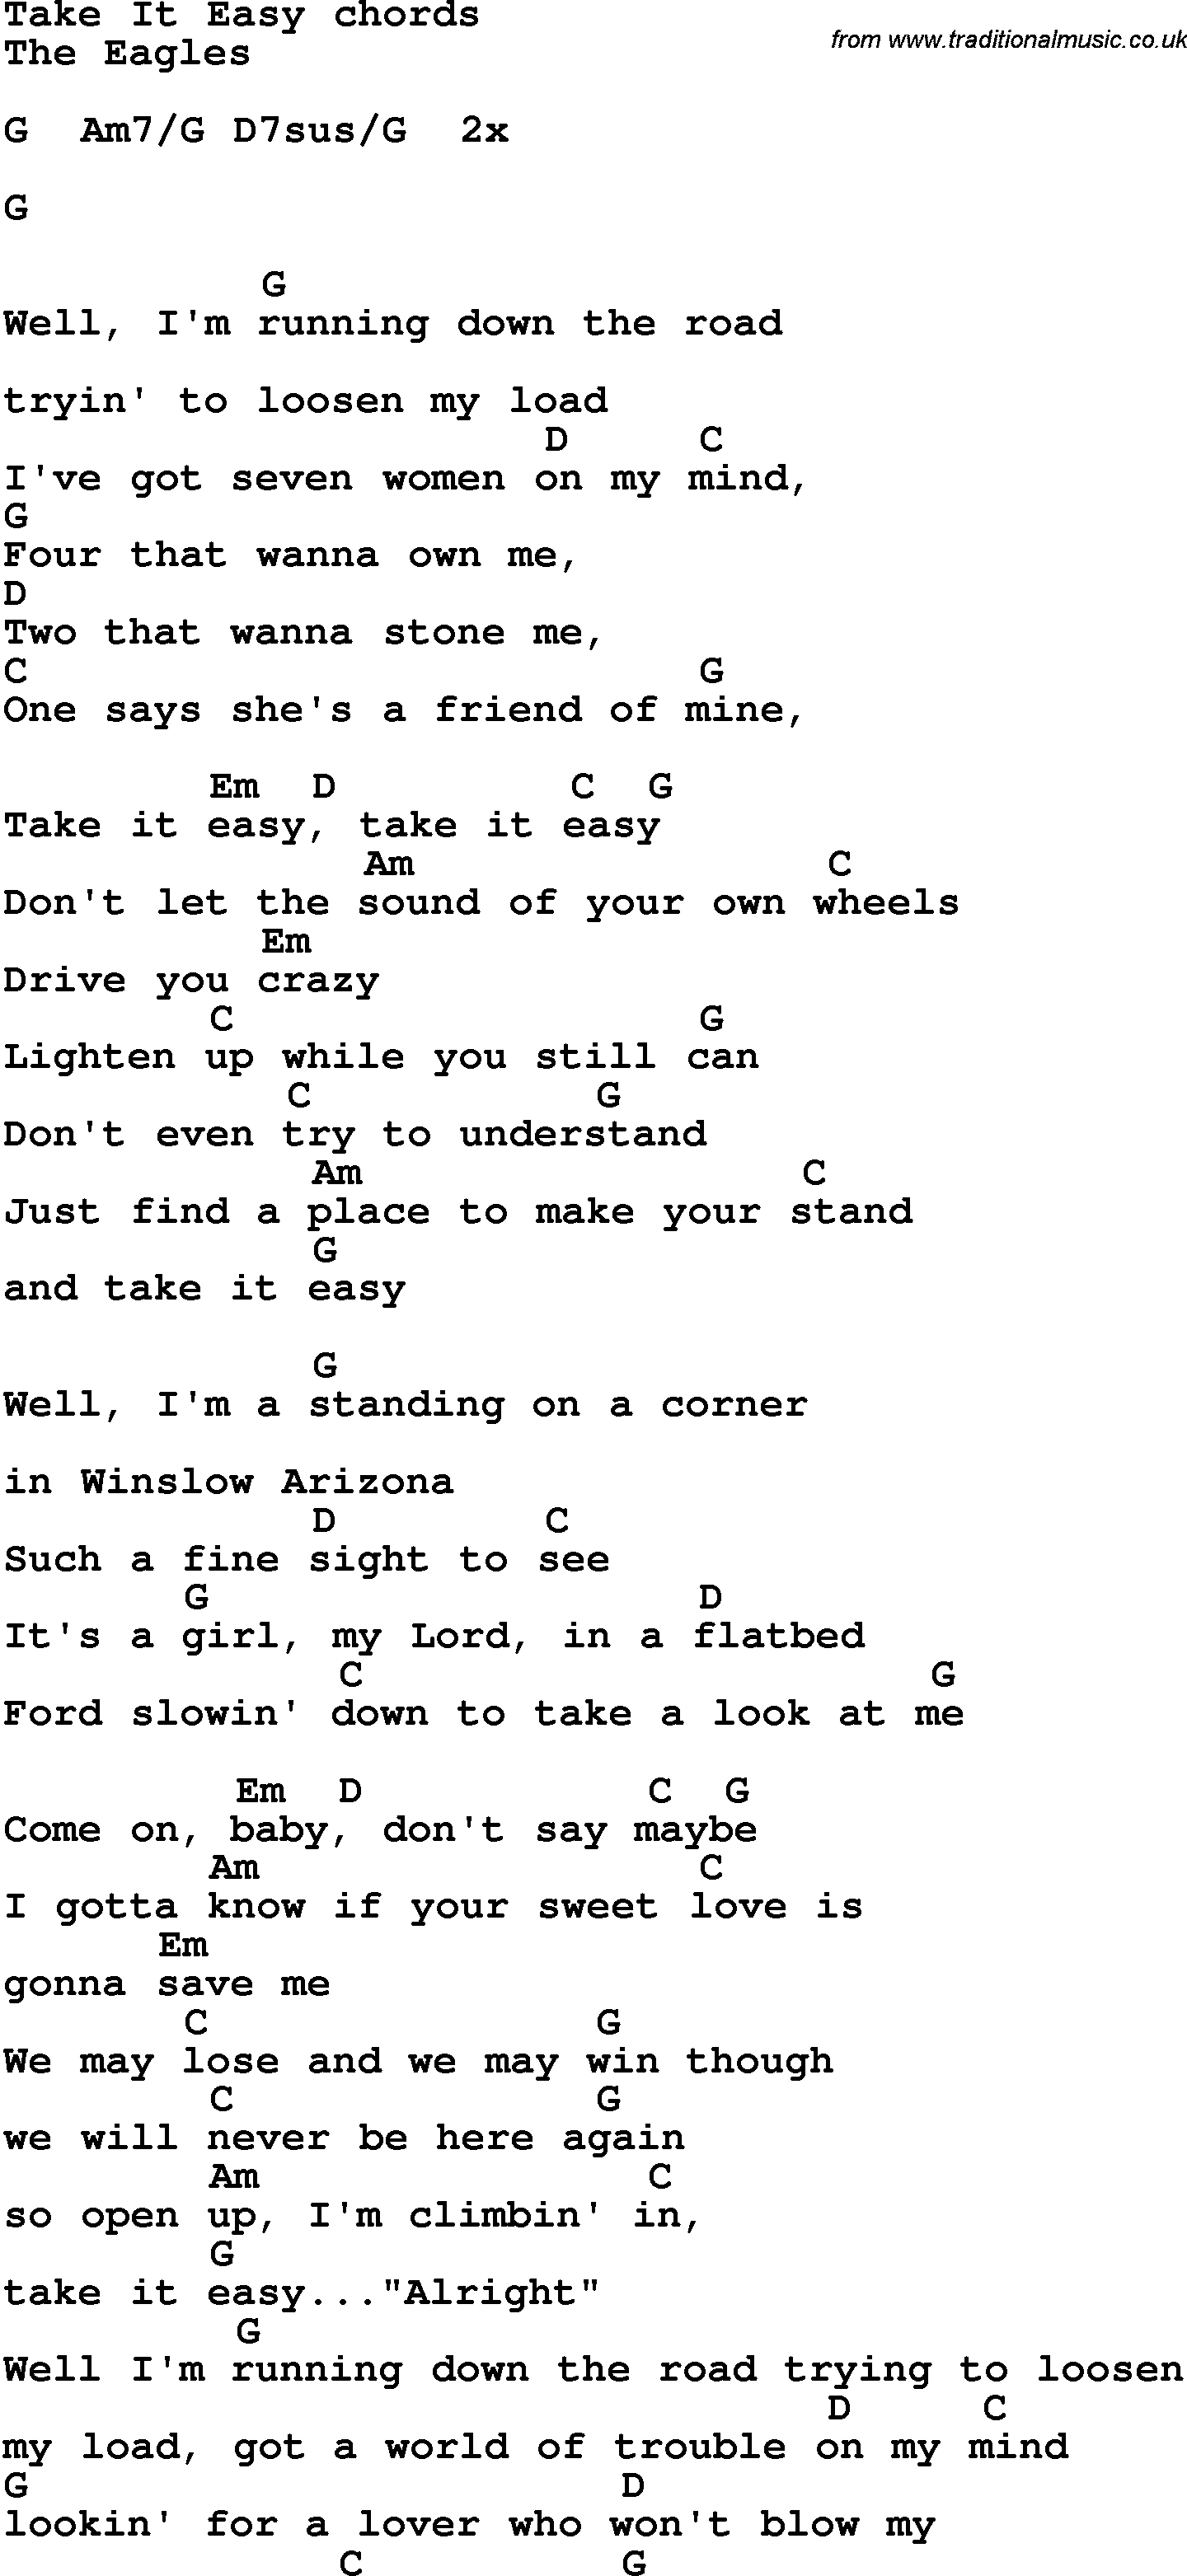 Song Lyrics With Guitar Chords For Take It Easy - The Eagles - Free Printable Song Lyrics With Guitar Chords